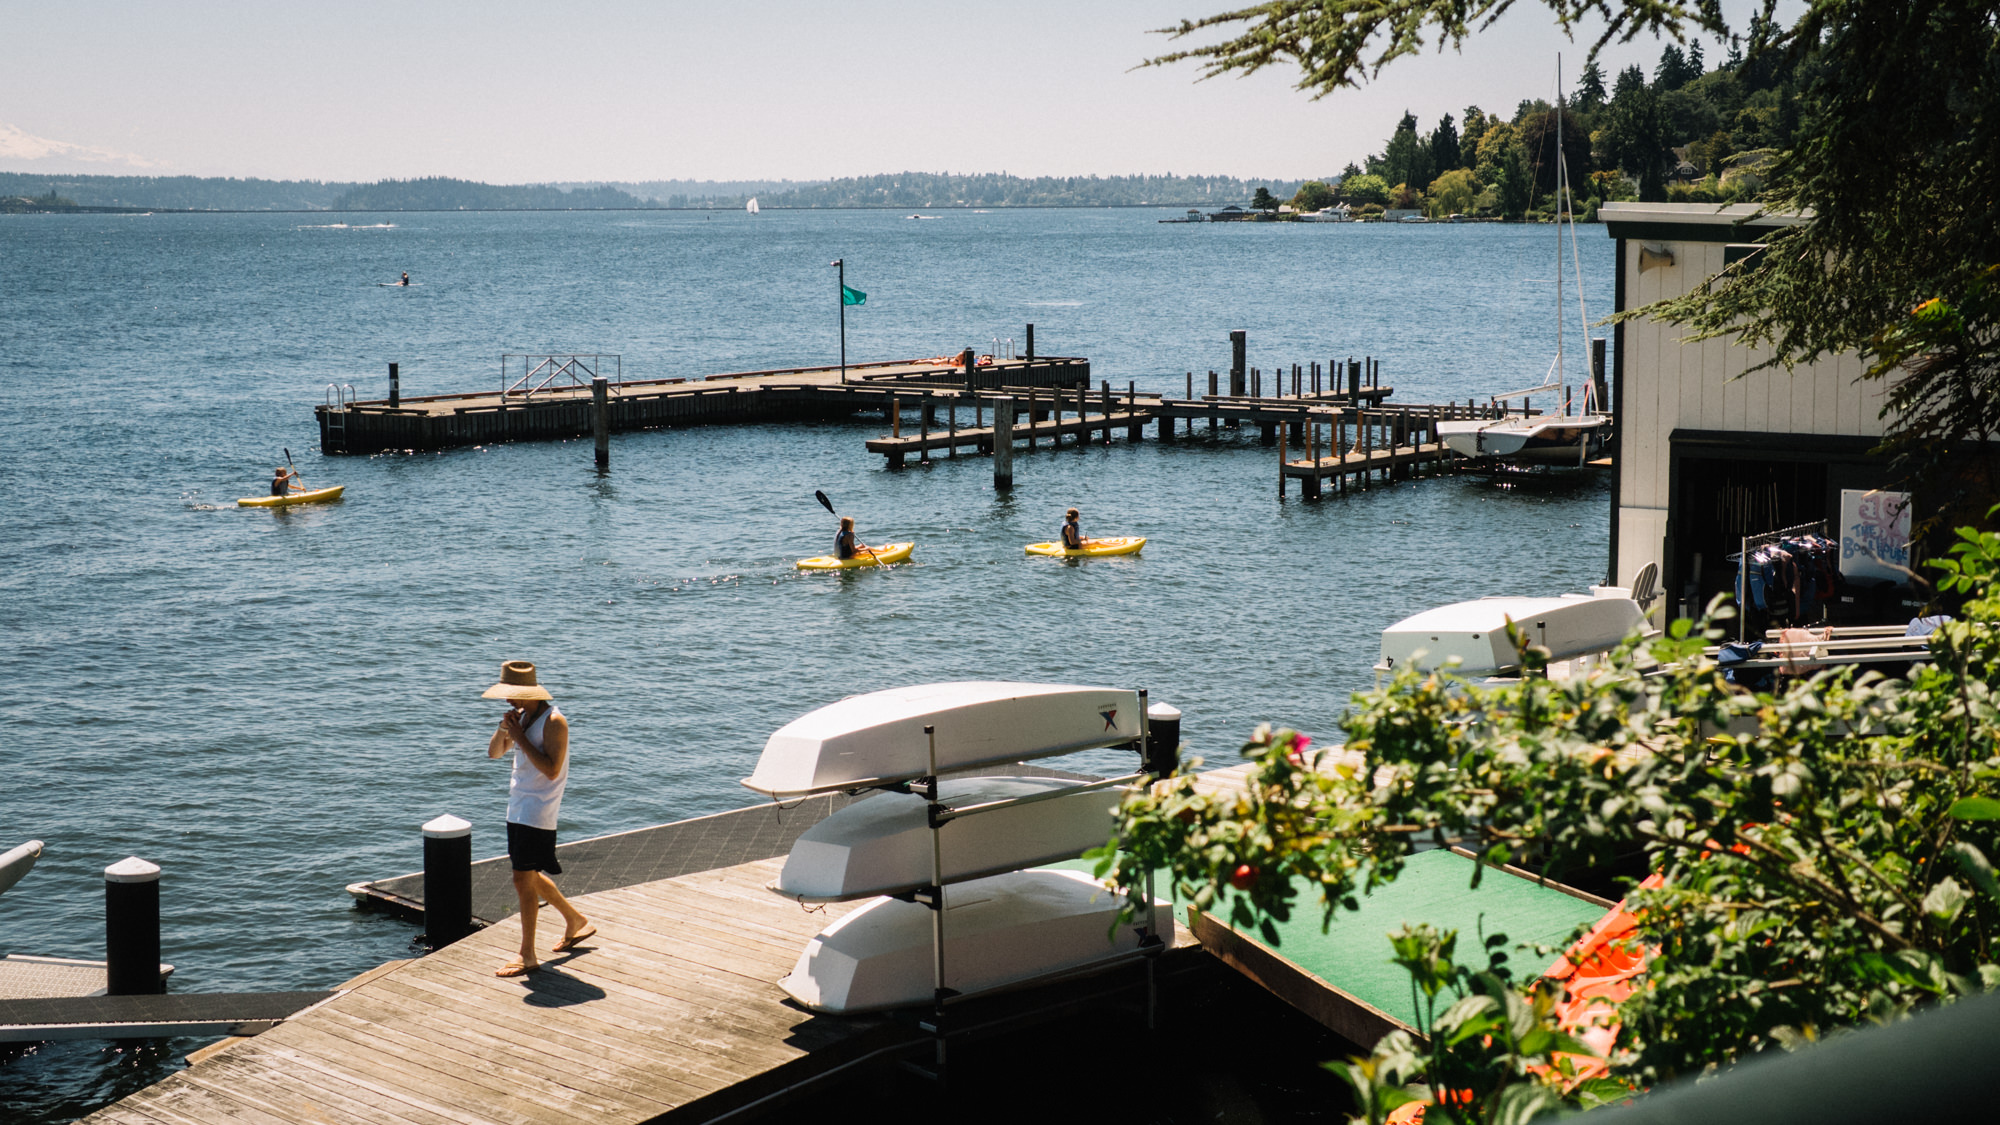 Club members kayaking at the Seattle Tennis Club, a sports club and wedding venue in Seattle, WA. Summer 2016. Photo by Seattle Wedding Photographers Jennifer Tai Photo Artistry.